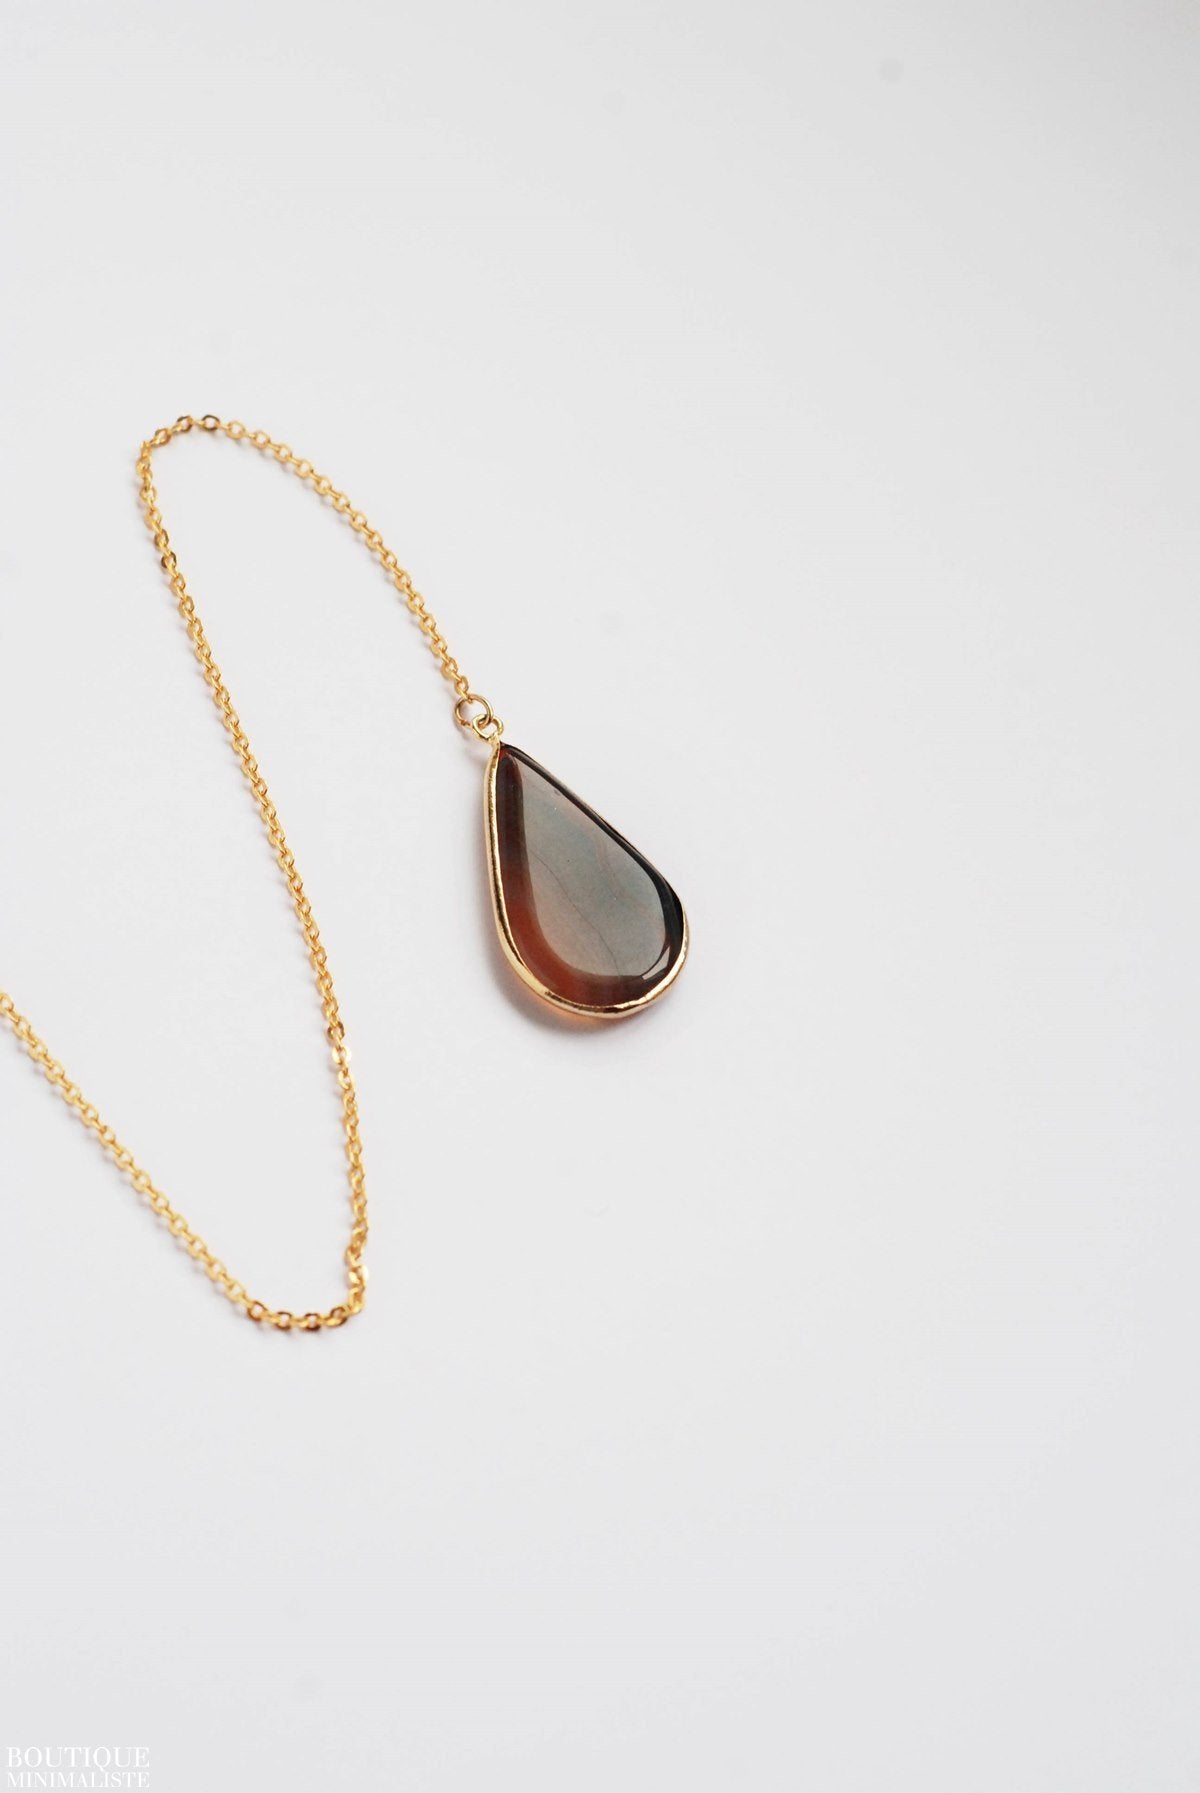 Geometric Lariat Necklace - Boutique Minimaliste has waterproof, durable, elegant and vintage inspired jewelry